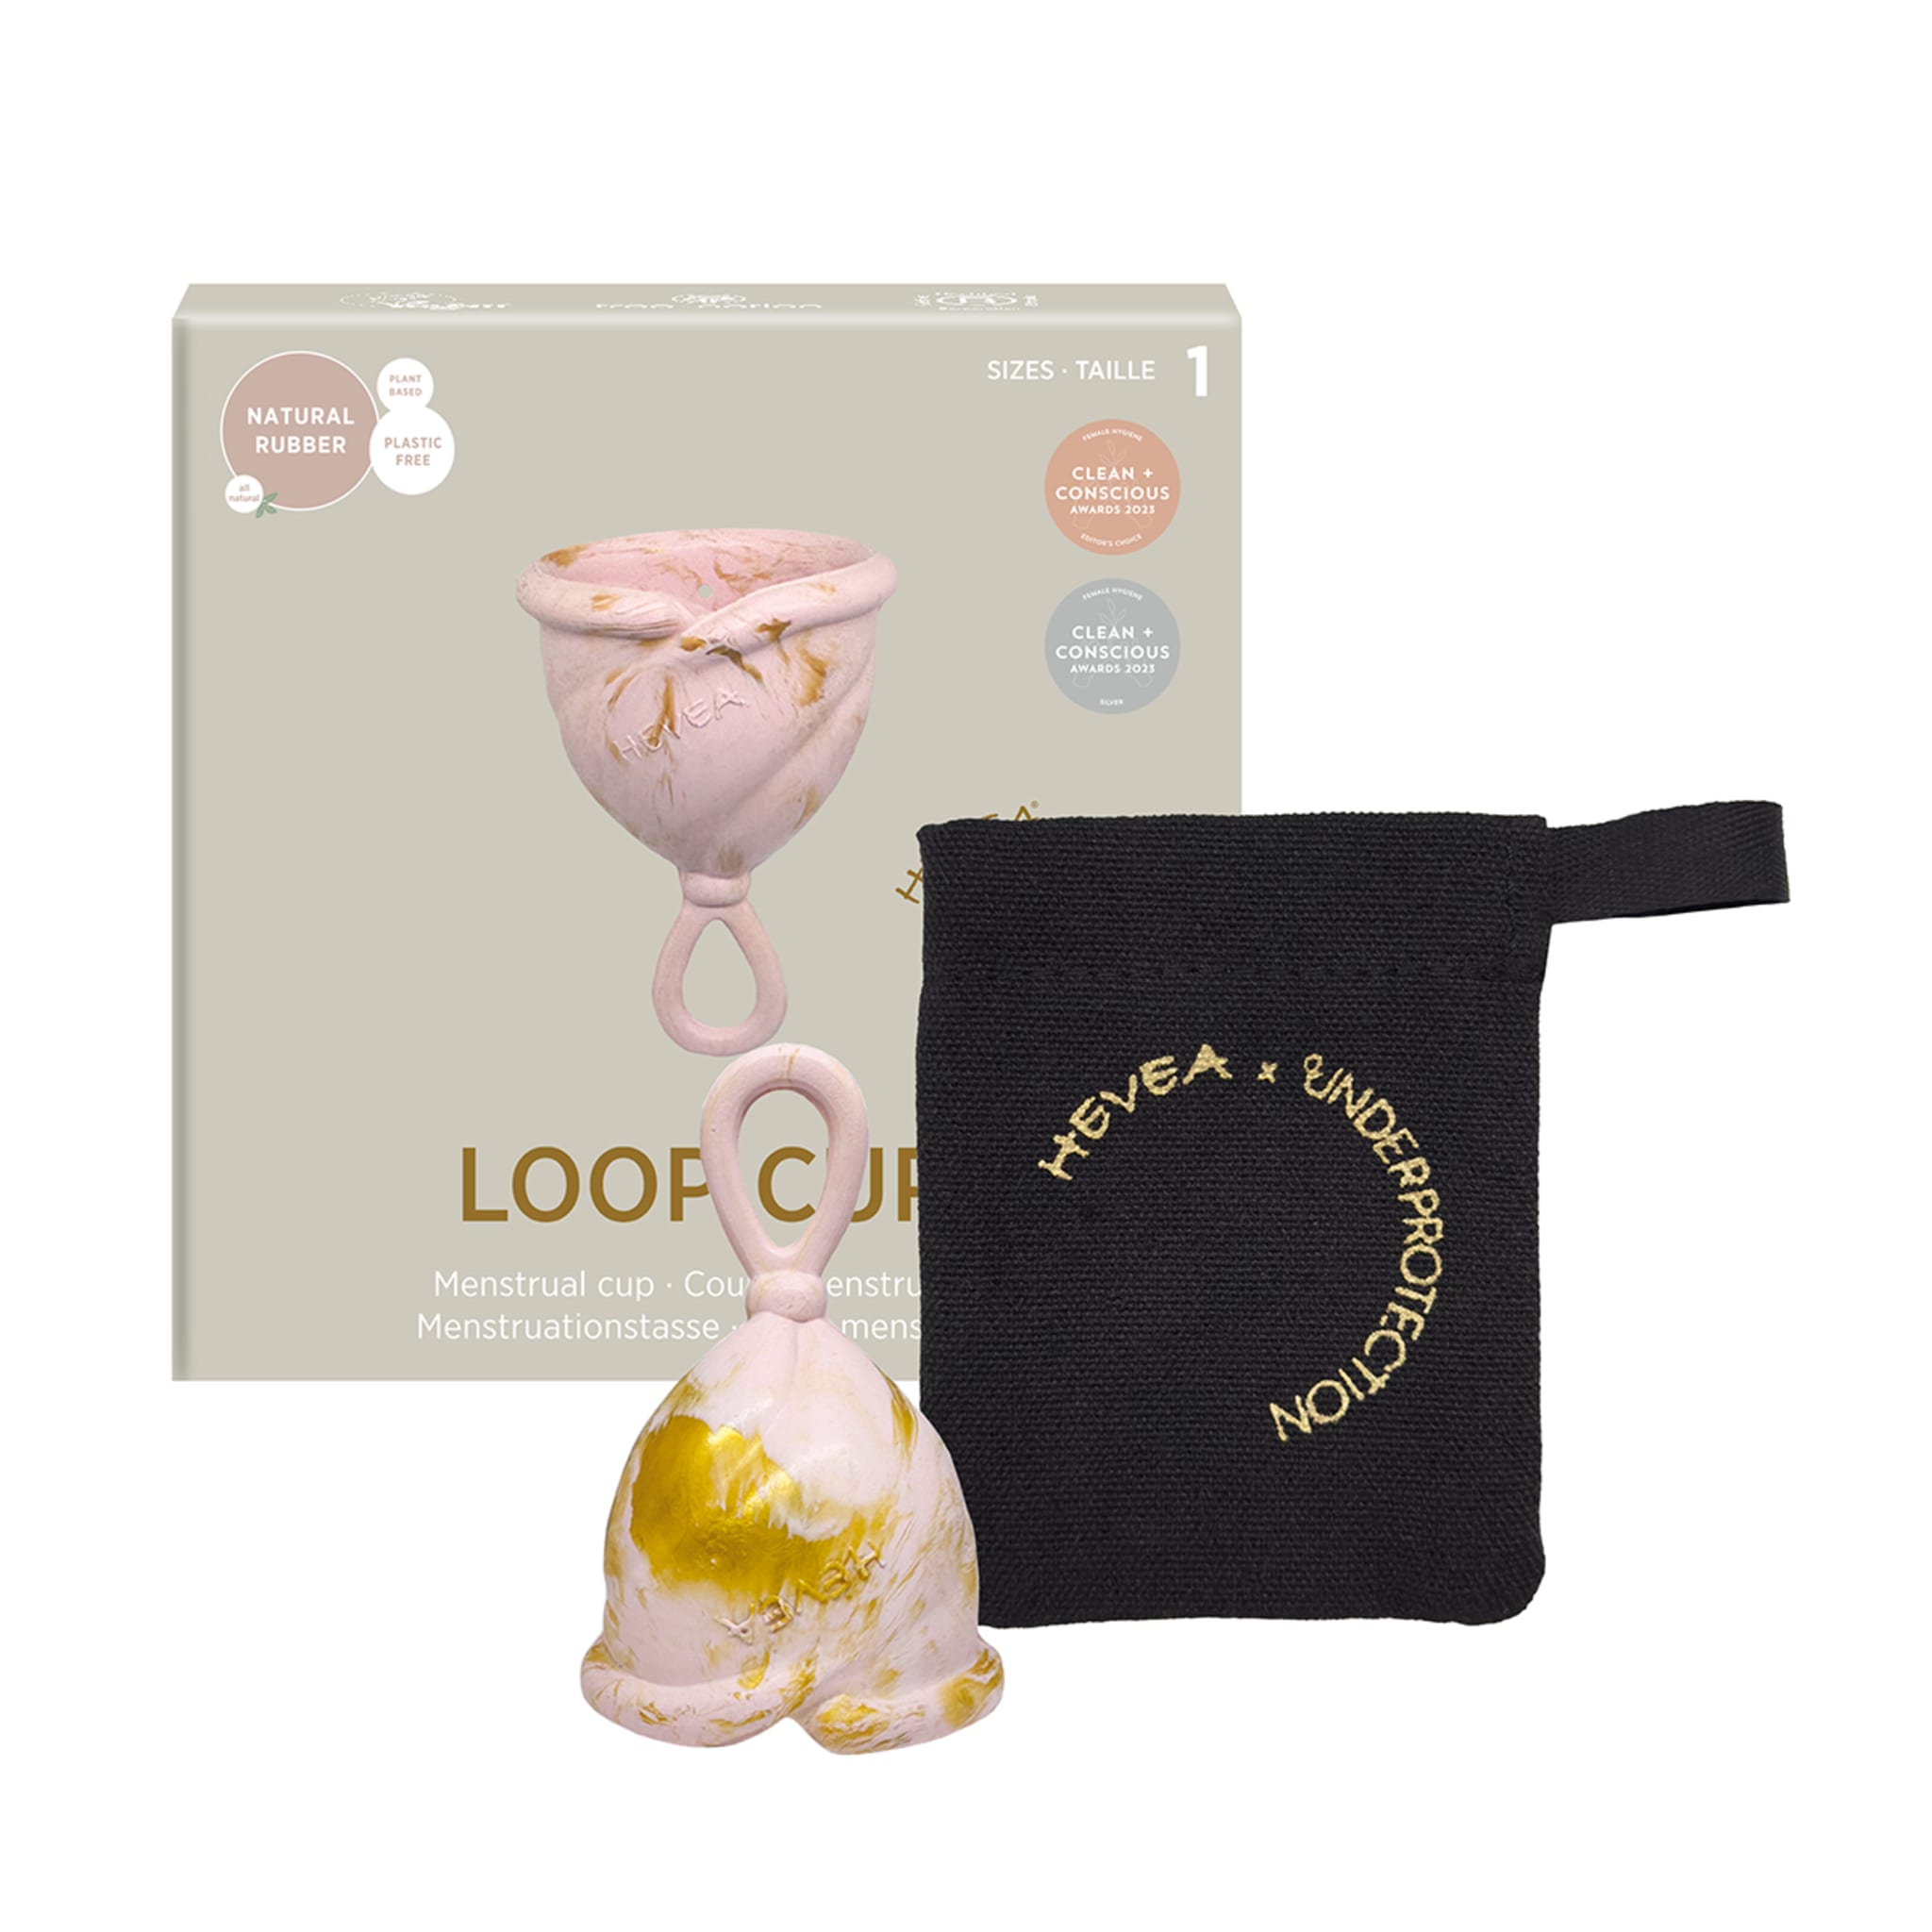 Loop cup - Menstrual cup in 100% Natural rubber from HEVEA –